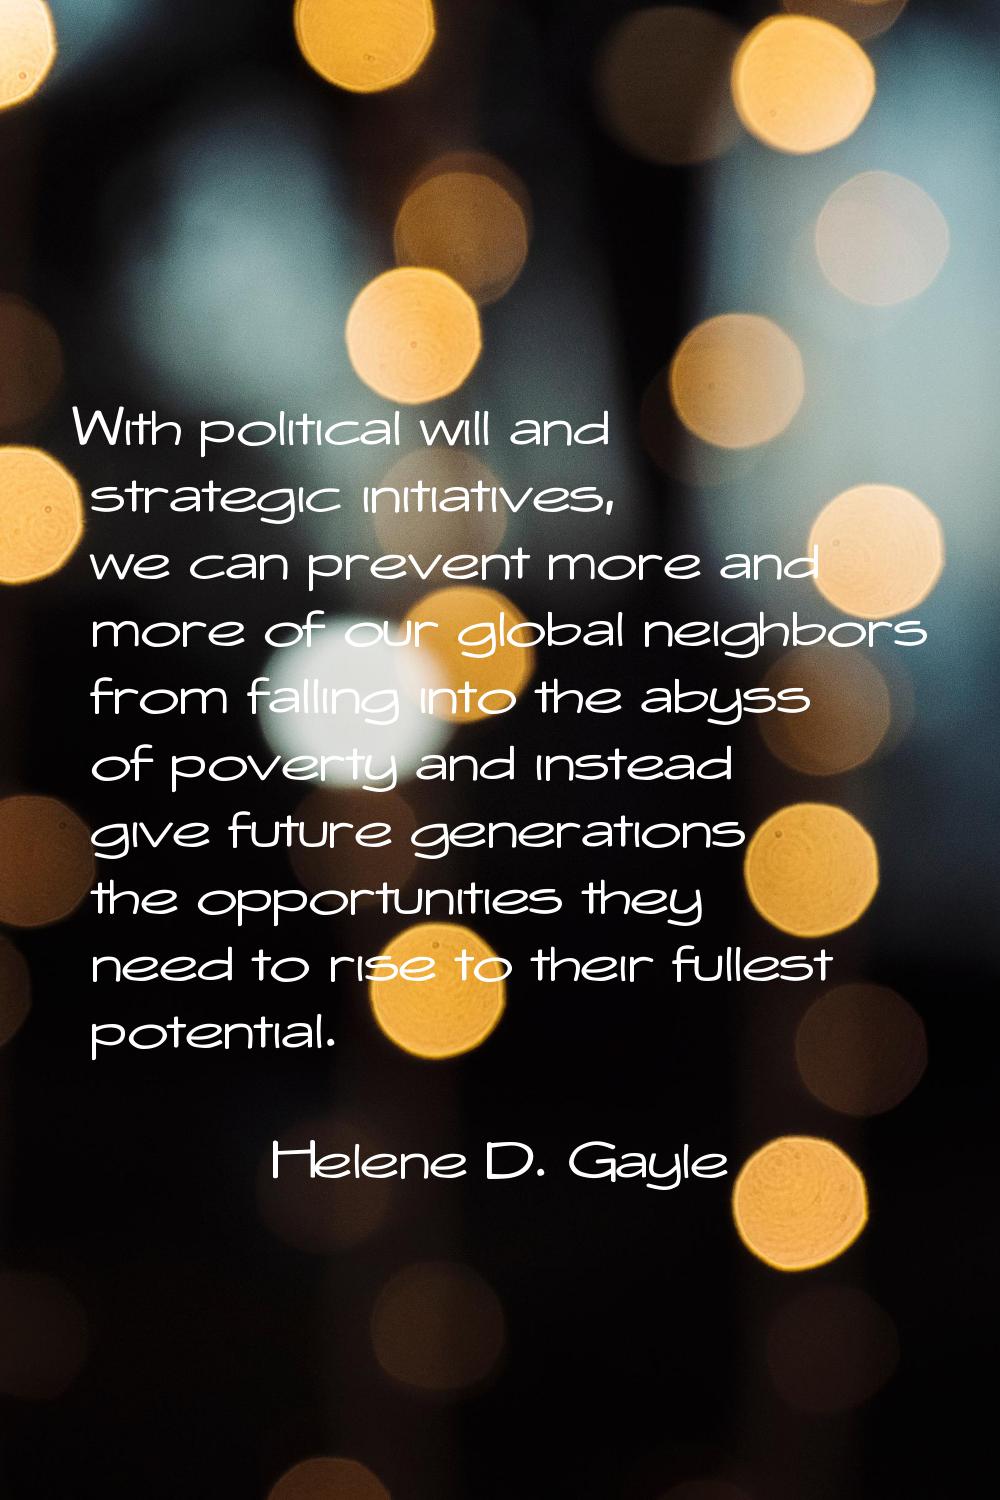 With political will and strategic initiatives, we can prevent more and more of our global neighbors